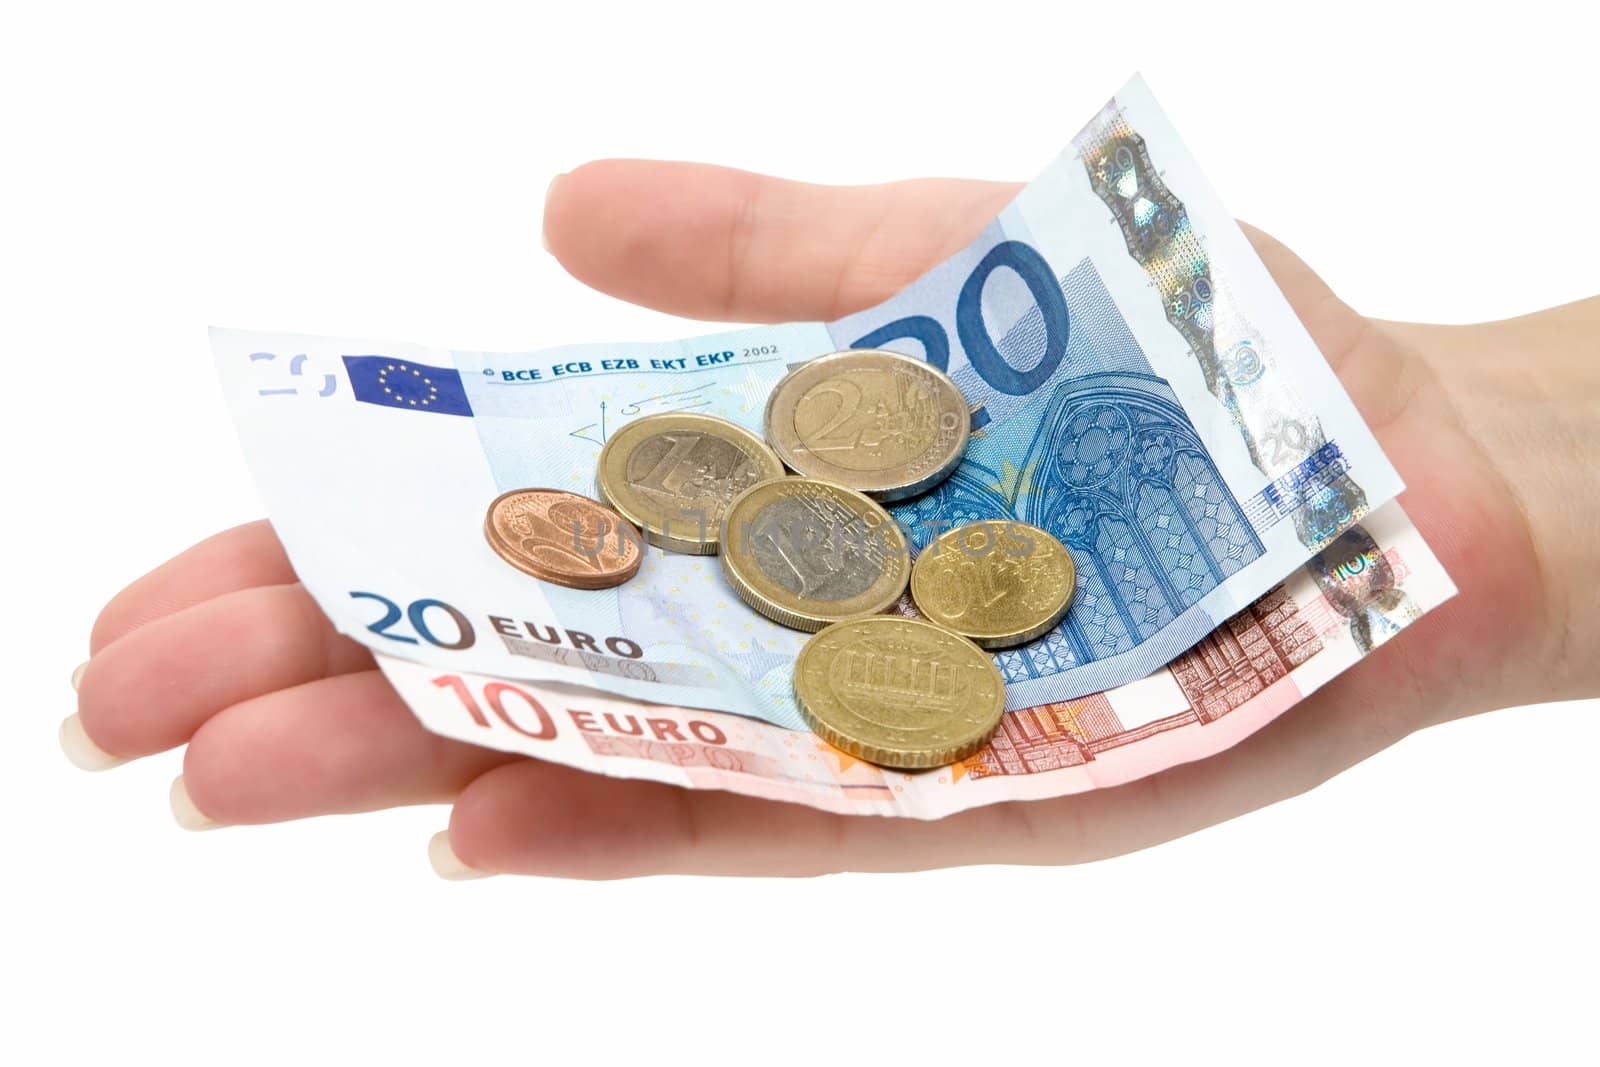 Female hand holding Euro banknotes and coins. Isolated on a white background.